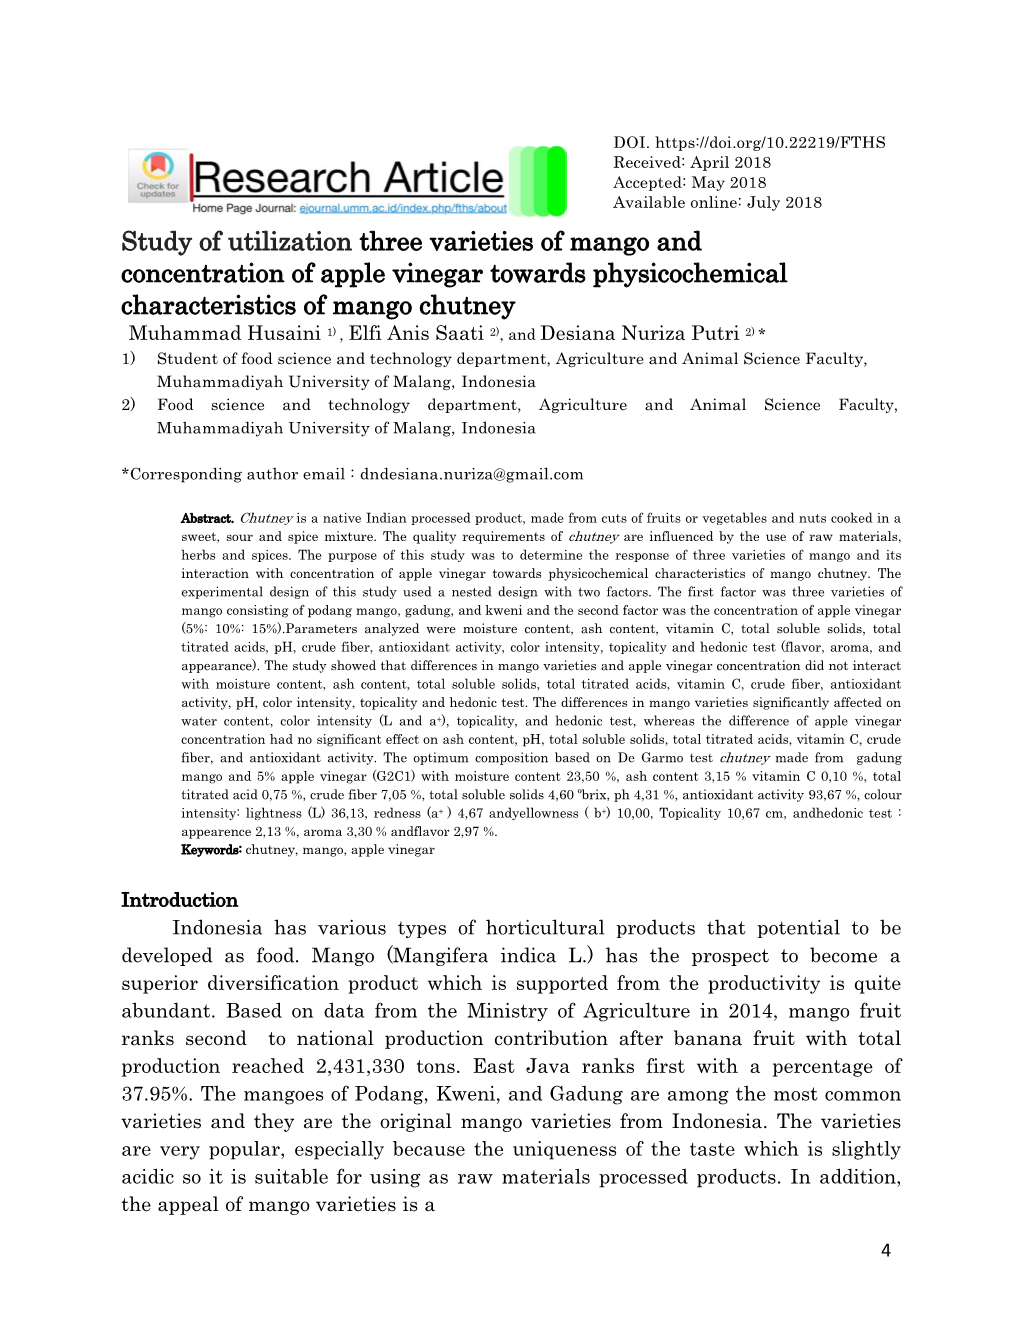 Study of Utilization Three Varieties of Mango and Concentration of Apple Vinegar Towards Physicochemical Characteristics of Mang